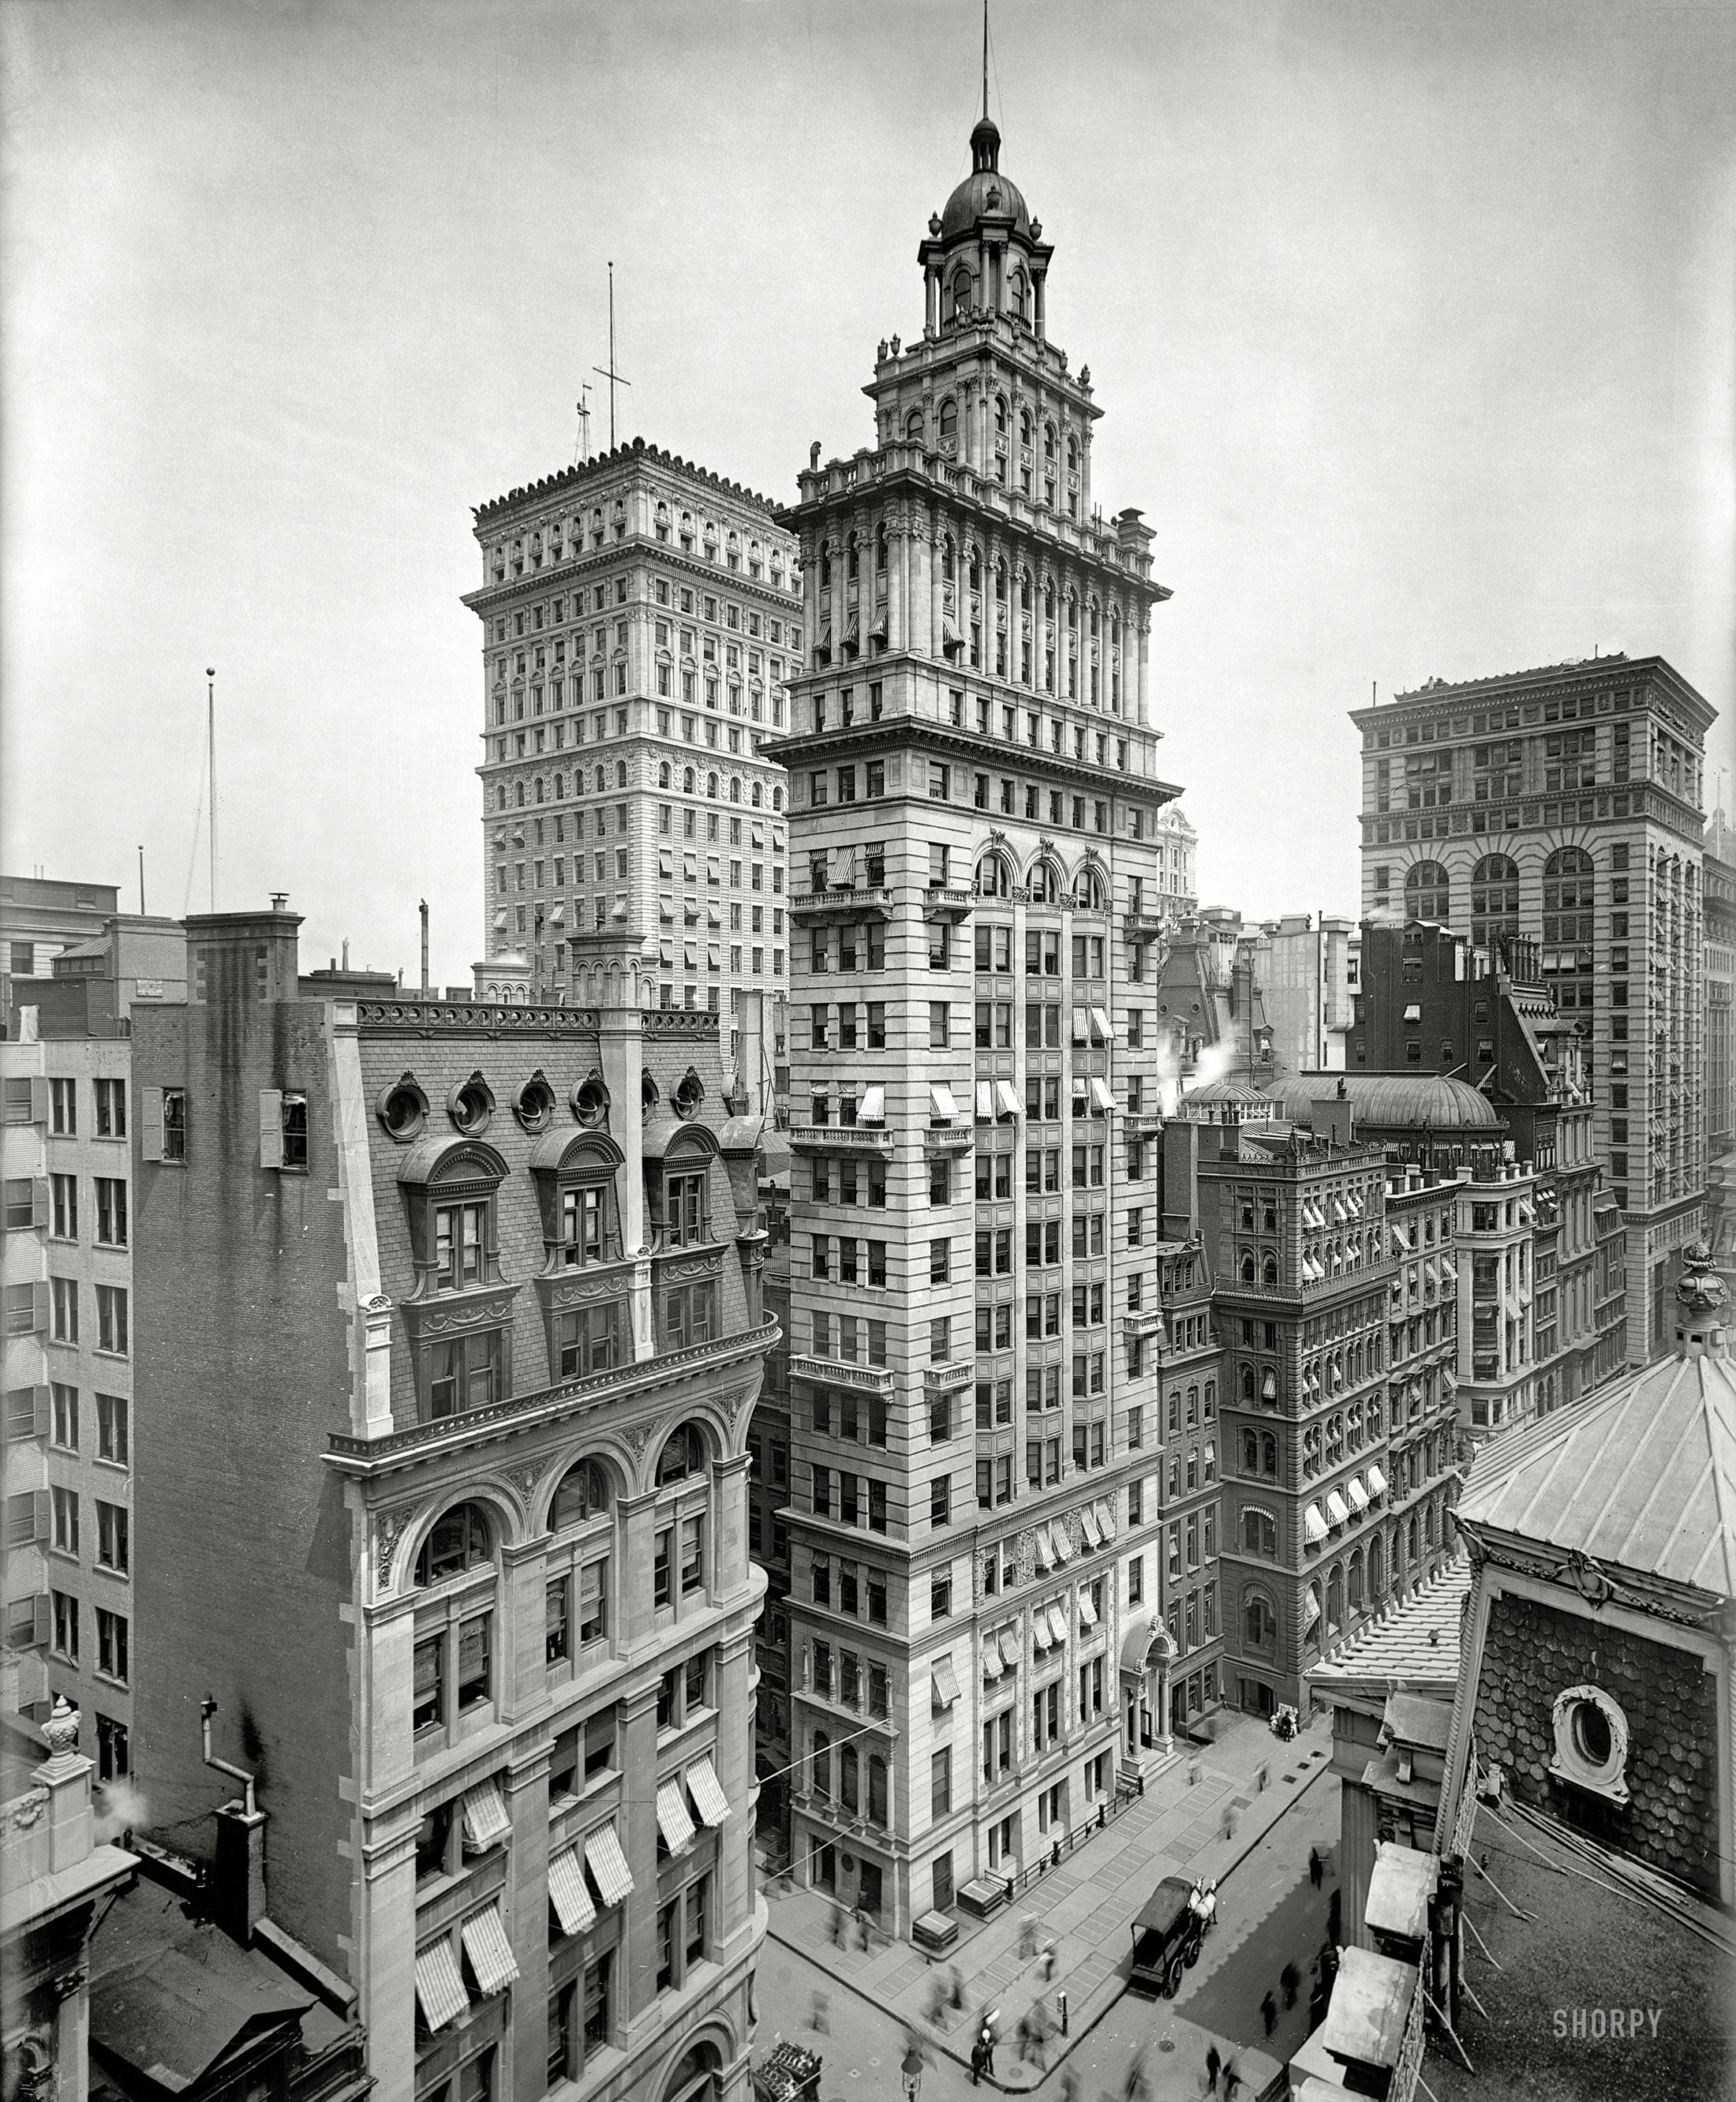 New York circa 1900. "Gillender Building." This improbably slender tower at the corner of Nassau and Wall Streets, one of the tallest buildings in the city when it was completed in 1897, met the wrecking ball in 1910. View full size.